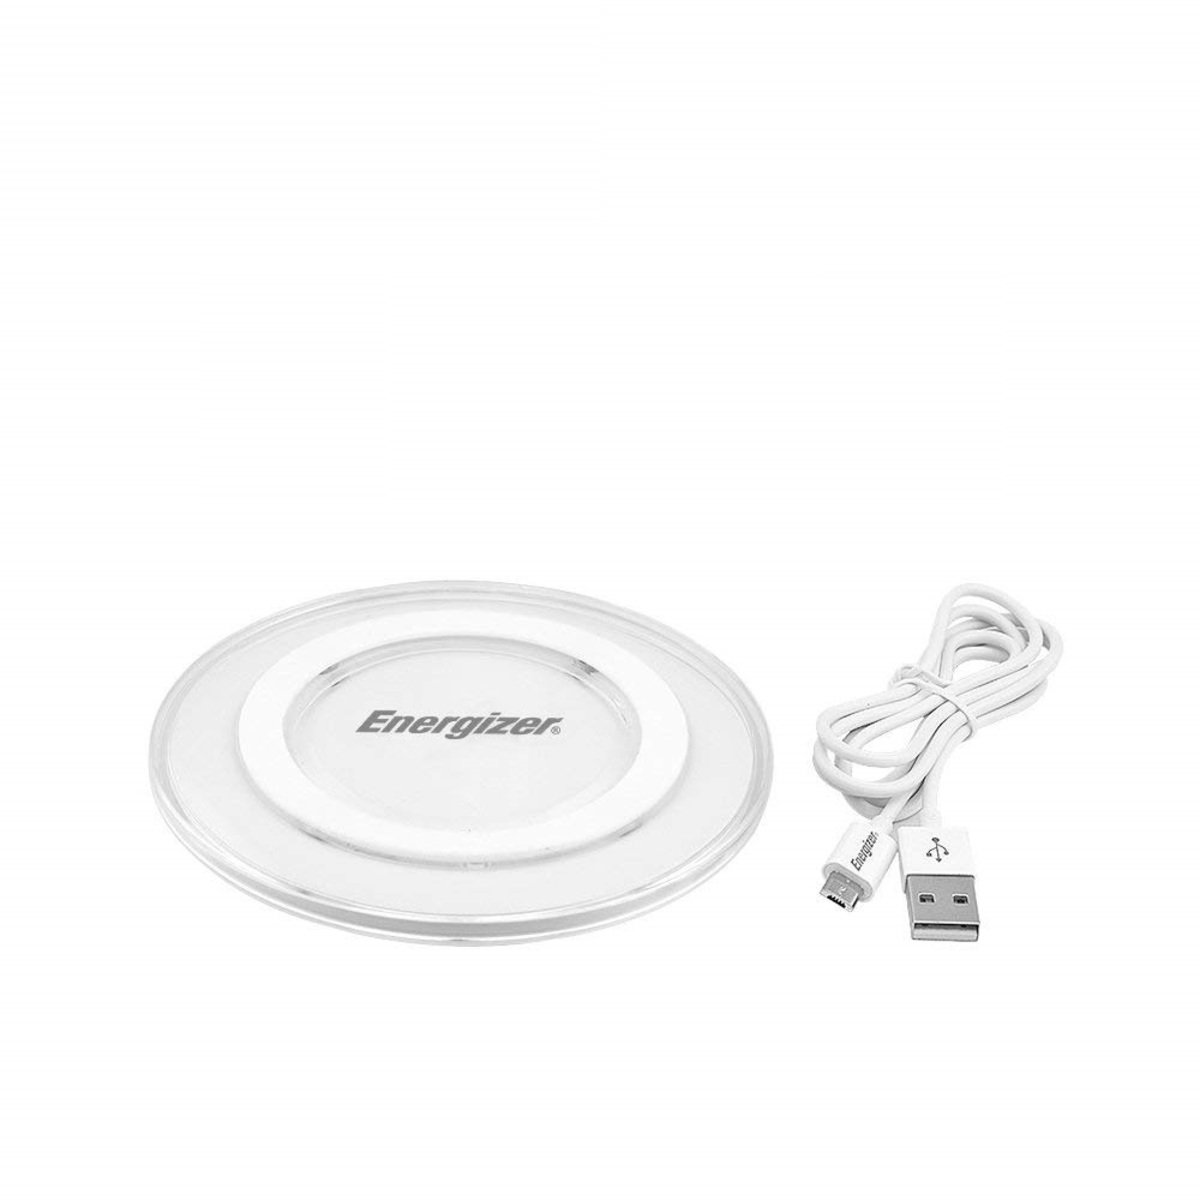 Energizer Wireless Charging PAD WLACWH4